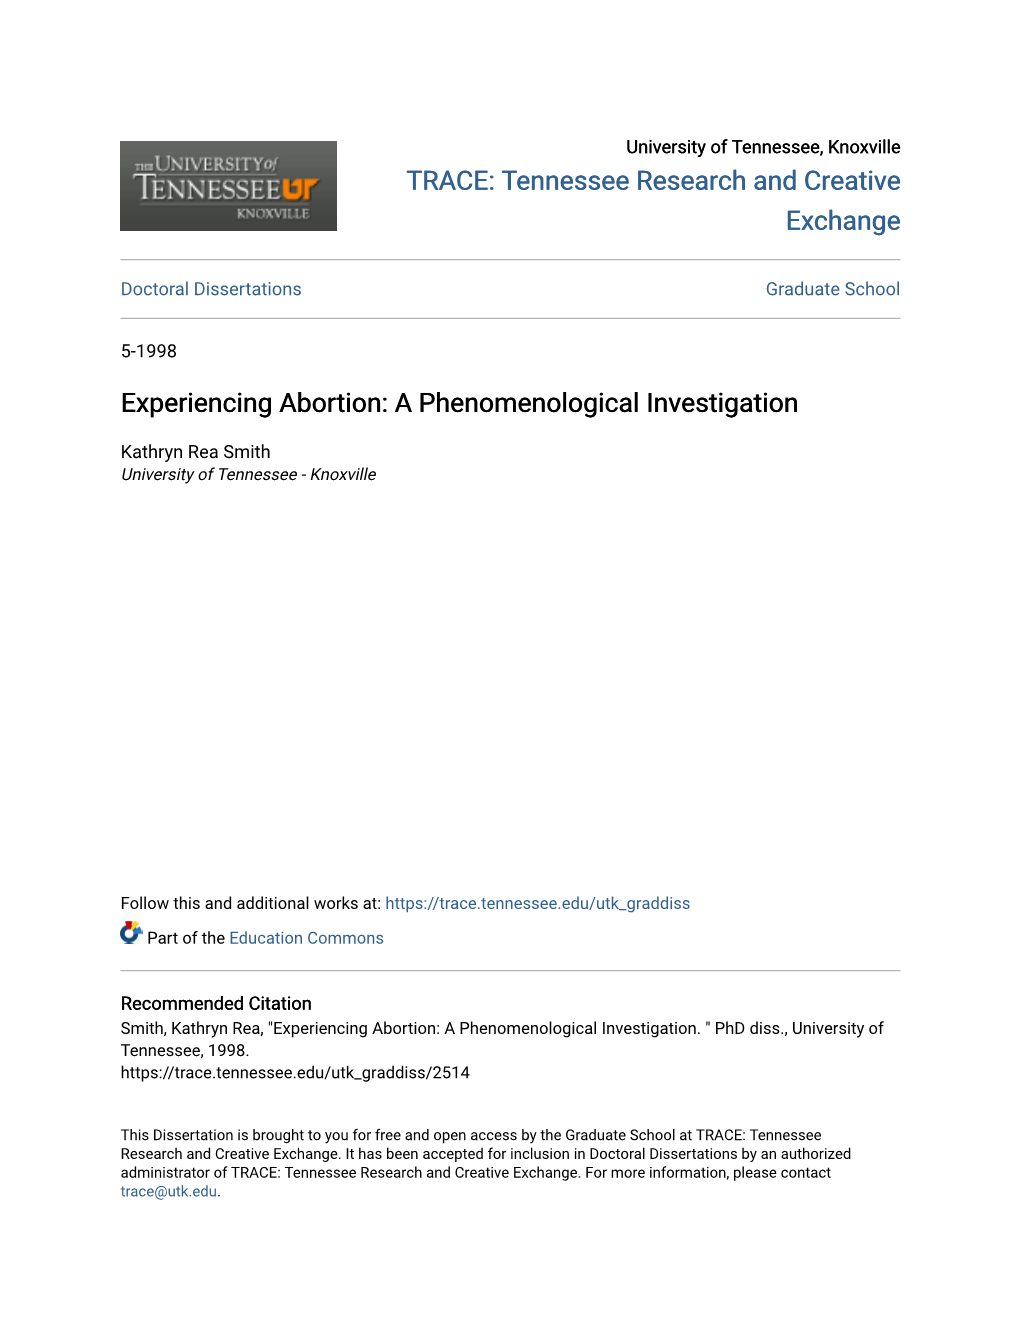 Experiencing Abortion: a Phenomenological Investigation